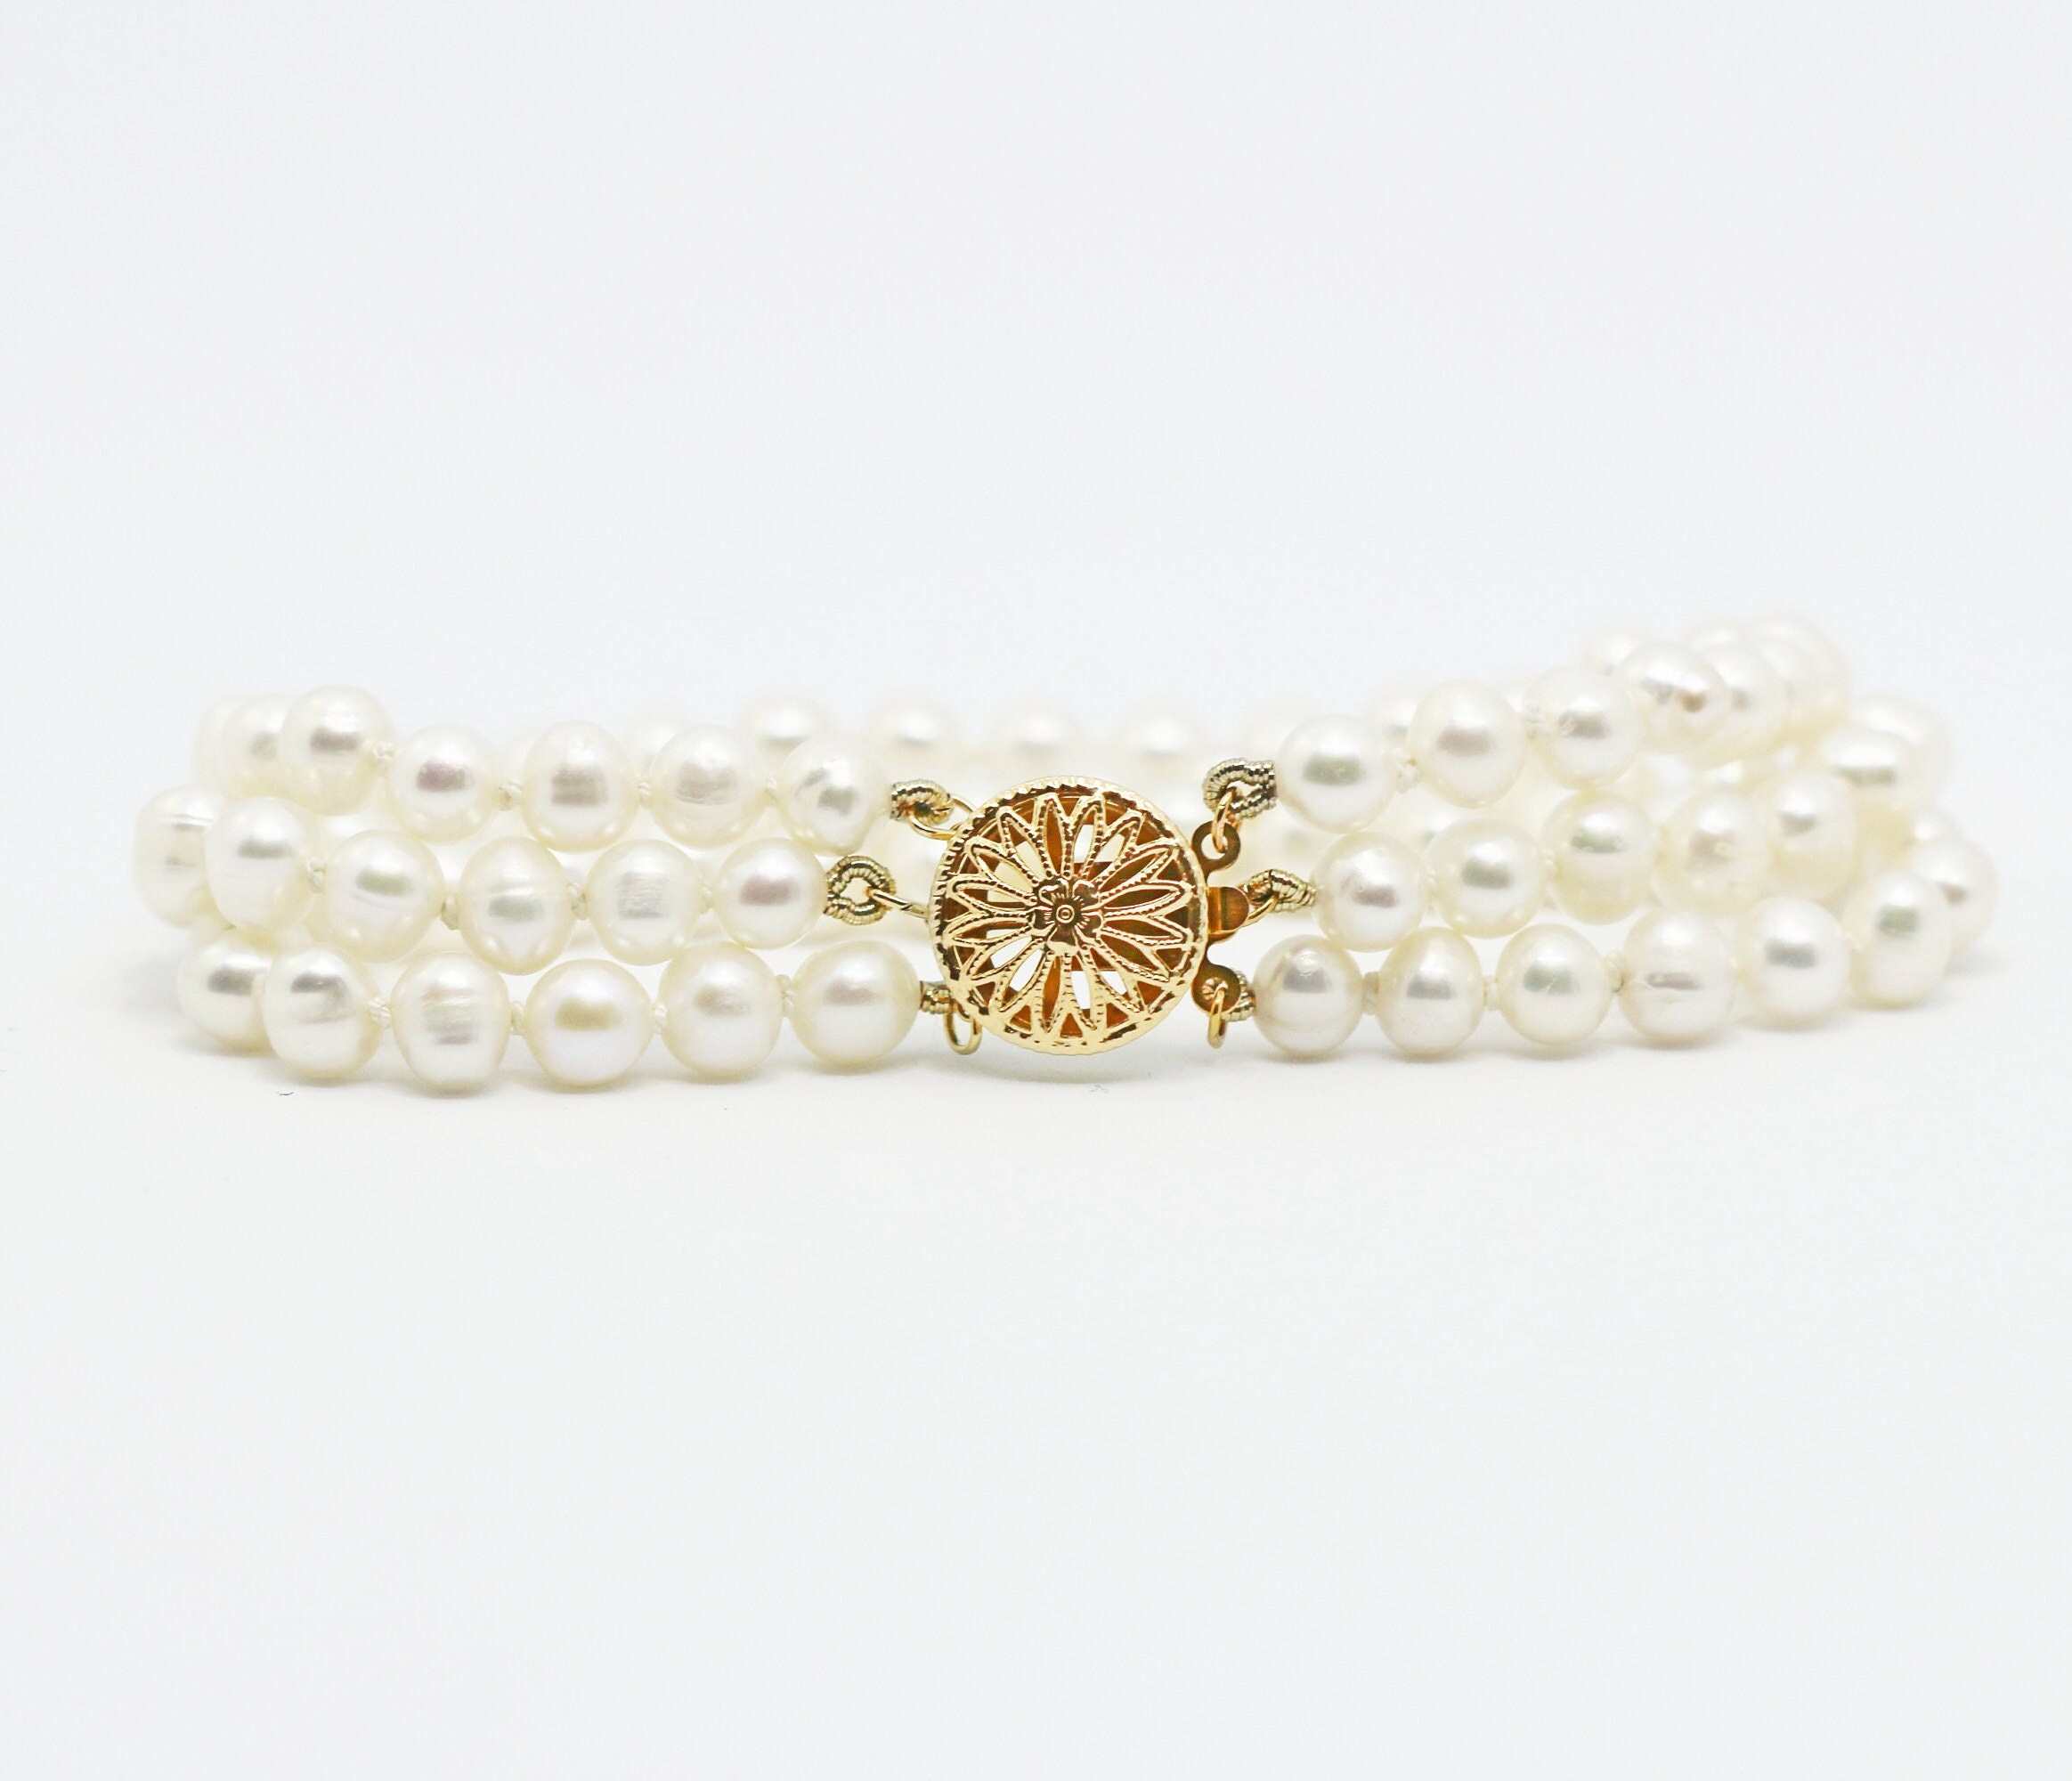 Antique Triple Strand Pearl and Diamond Necklace c. 1910 - Antique Jewelry  | Vintage Rings | Faberge EggsAntique Jewelry | Vintage Rings | Faberge Eggs